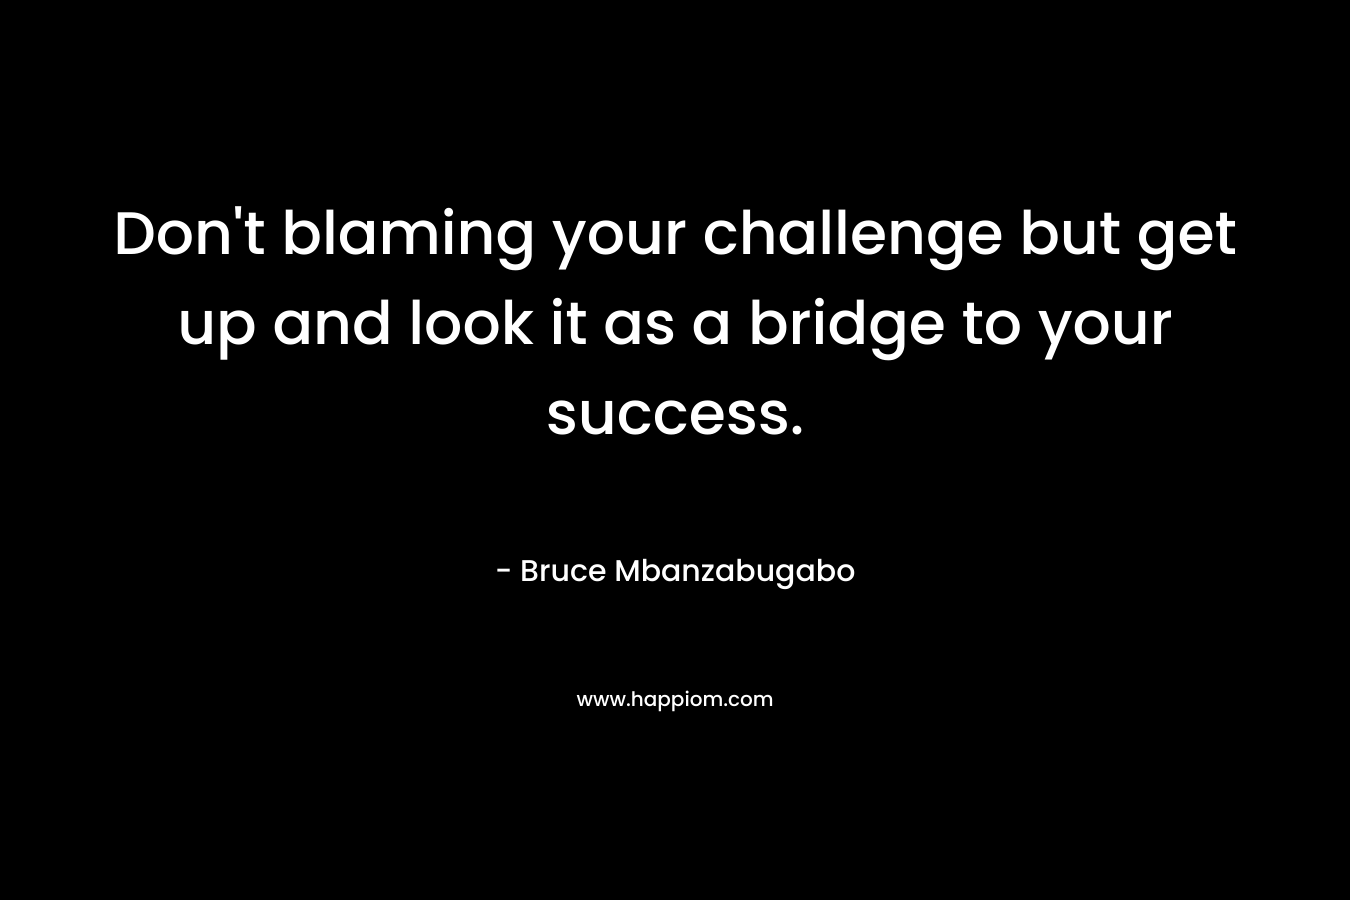 Don't blaming your challenge but get up and look it as a bridge to your success.